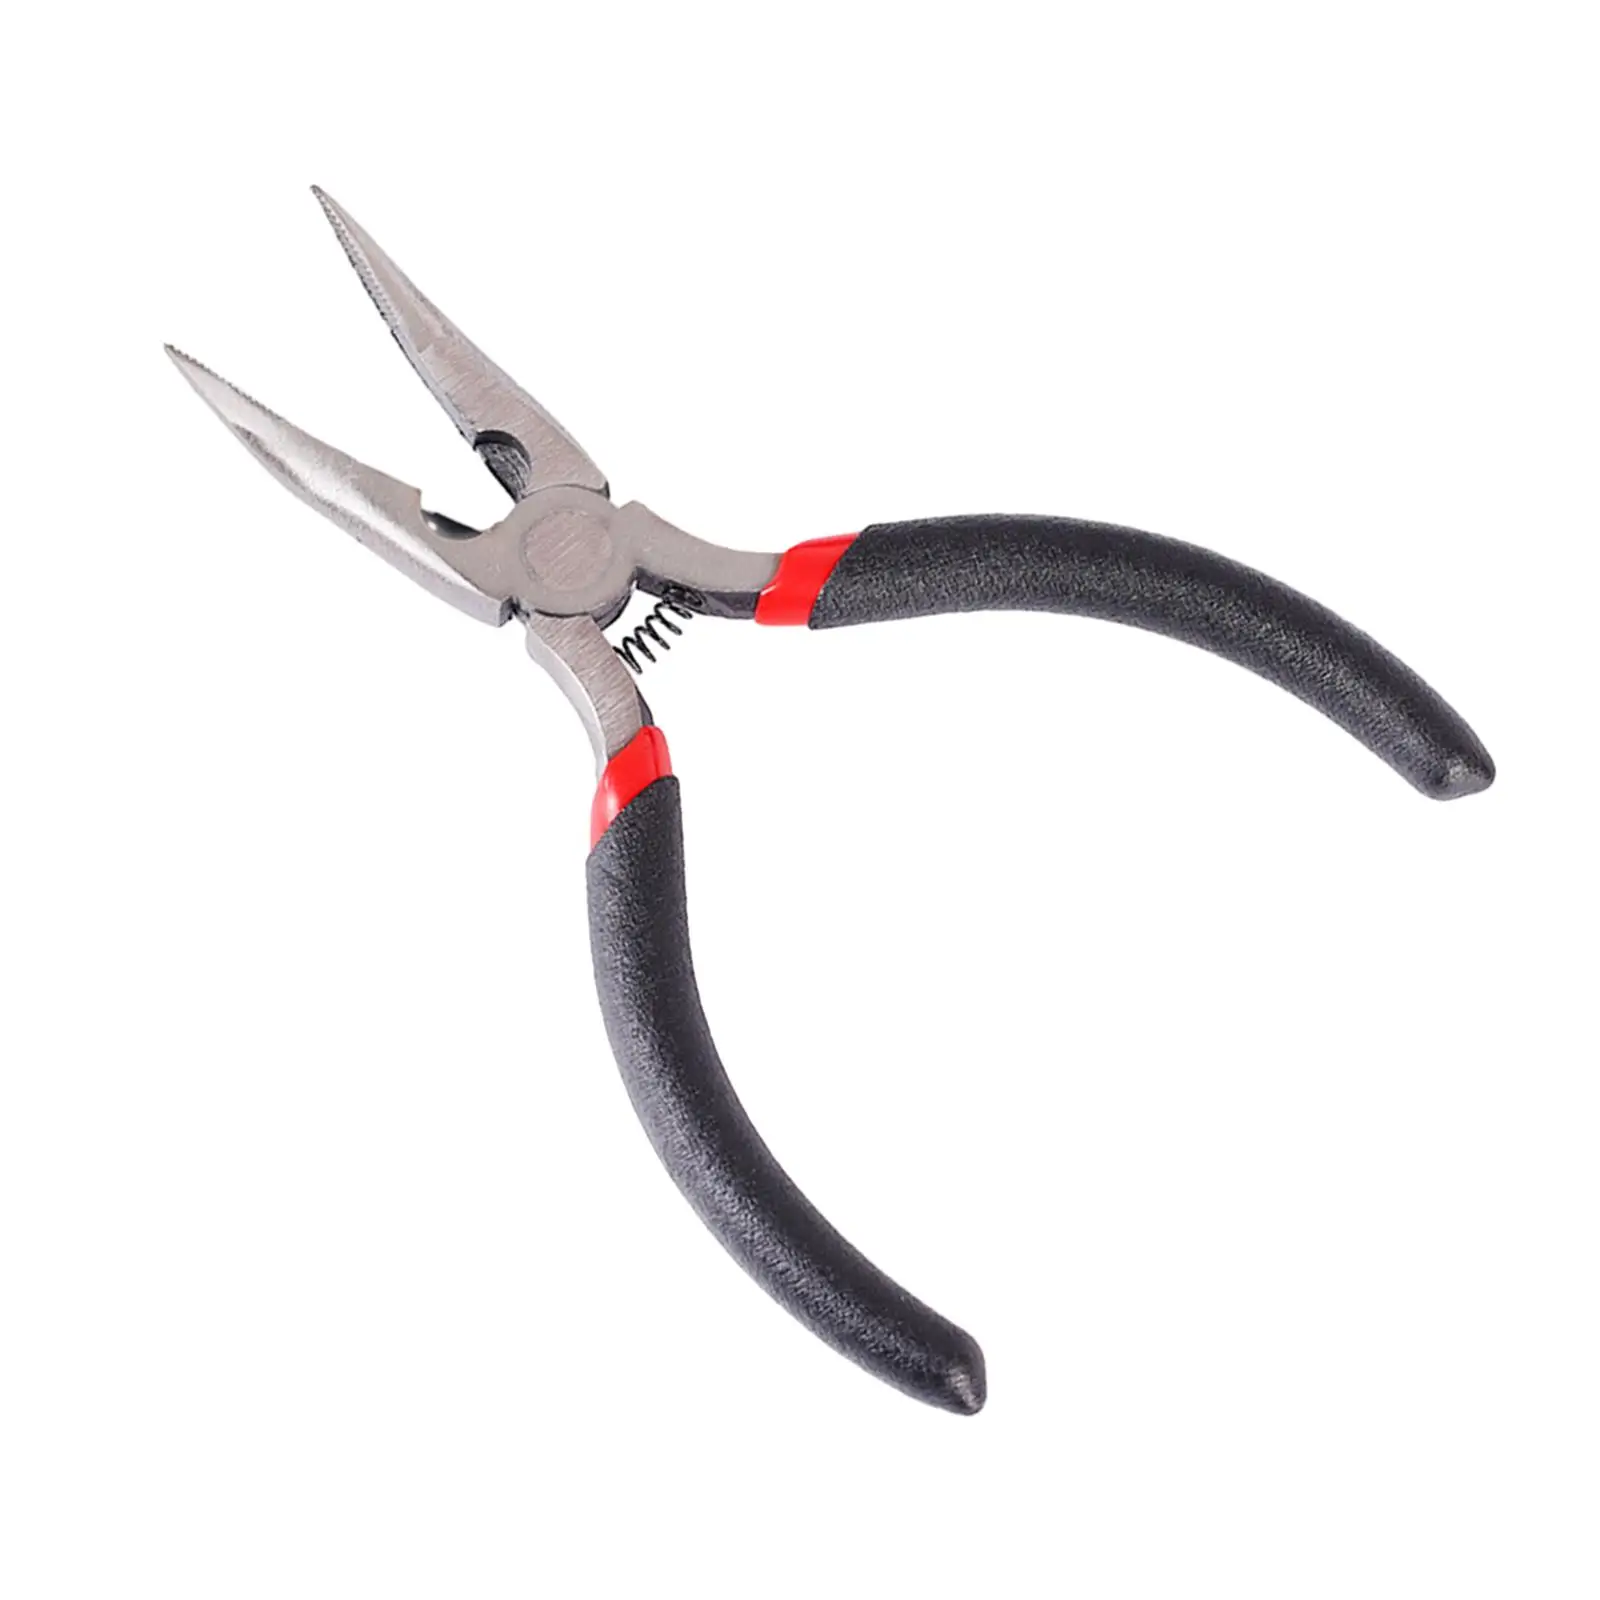 Poultry Kitchen Scissors PVC Handle Heavy Duty Chicken Meat for Turkey Seafood Thanksgiving Chopping Vegetables